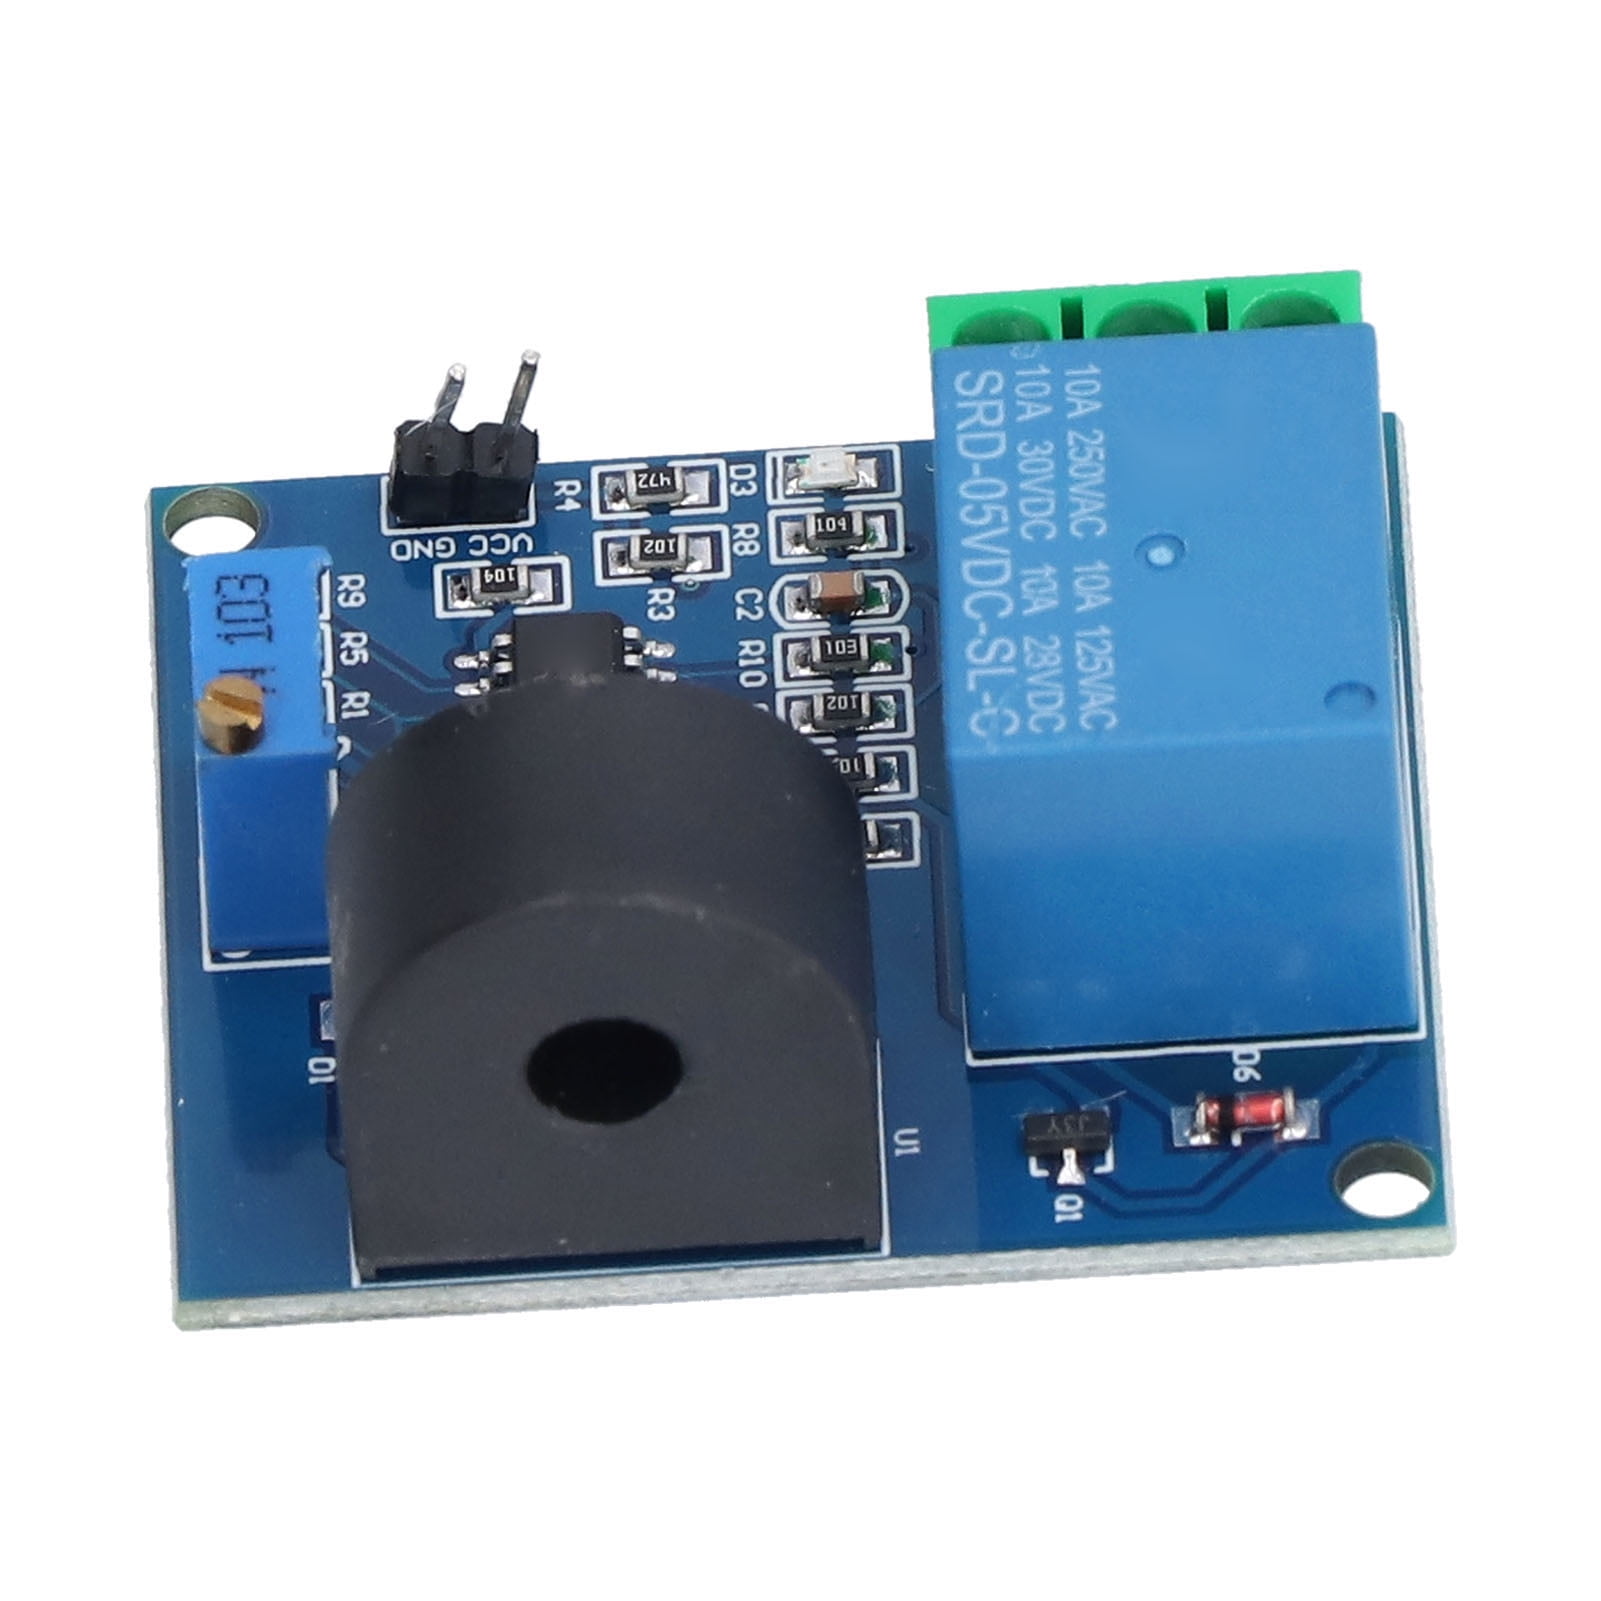 DC 12V AC Sensor Protection Relay Module 5A Over-Current Signal Switch Output 